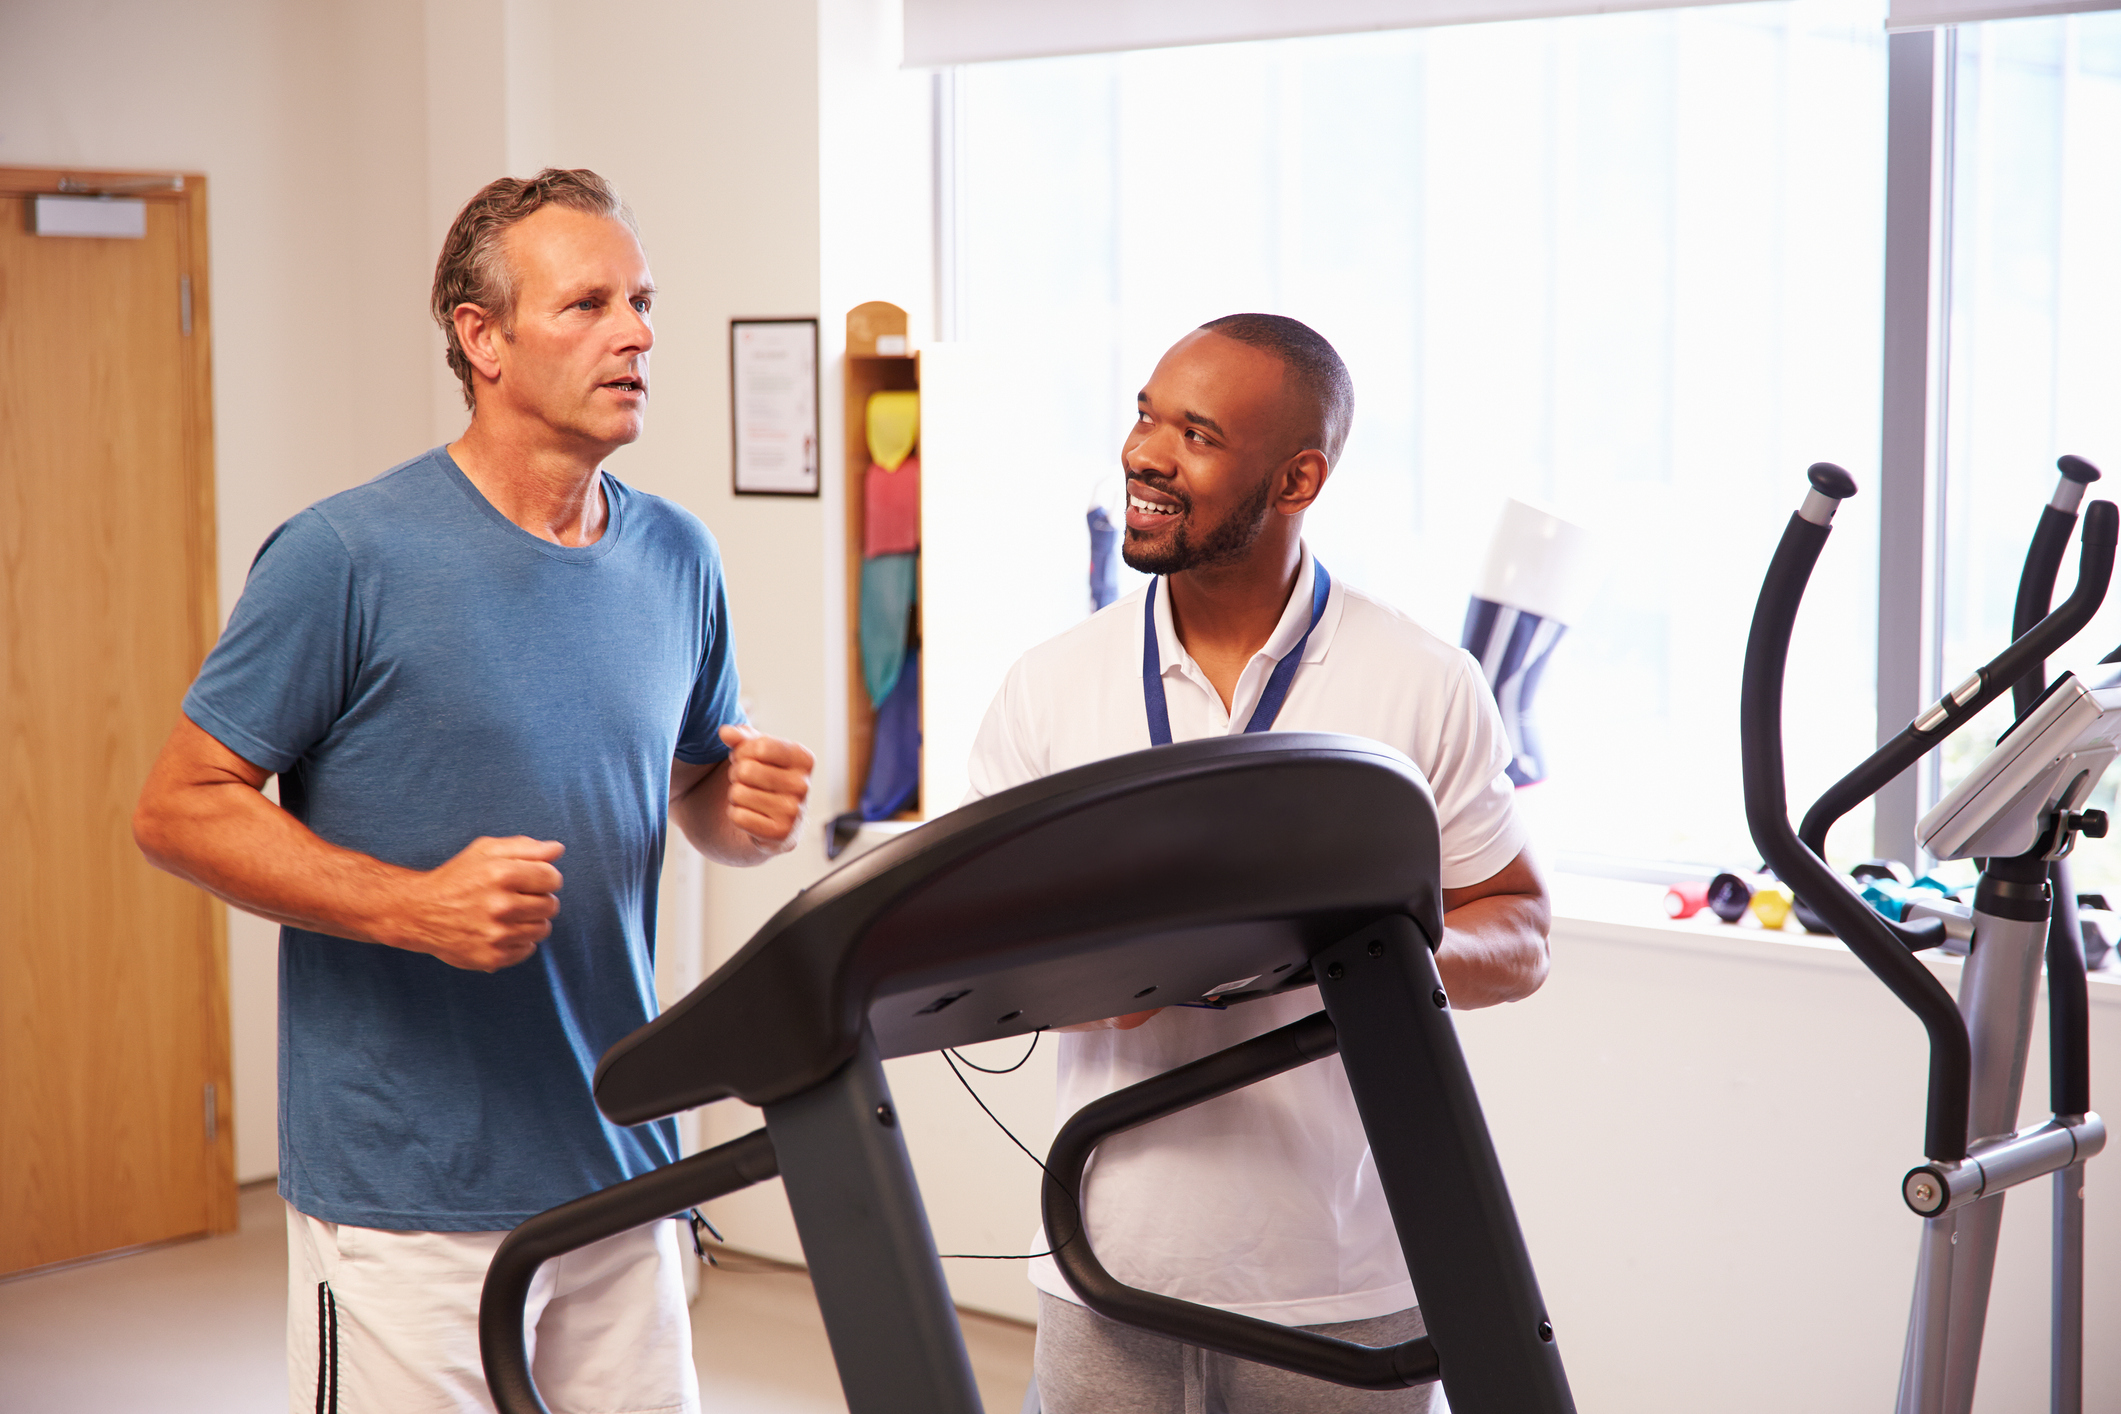 Can heart failure really be turned around with exercise?